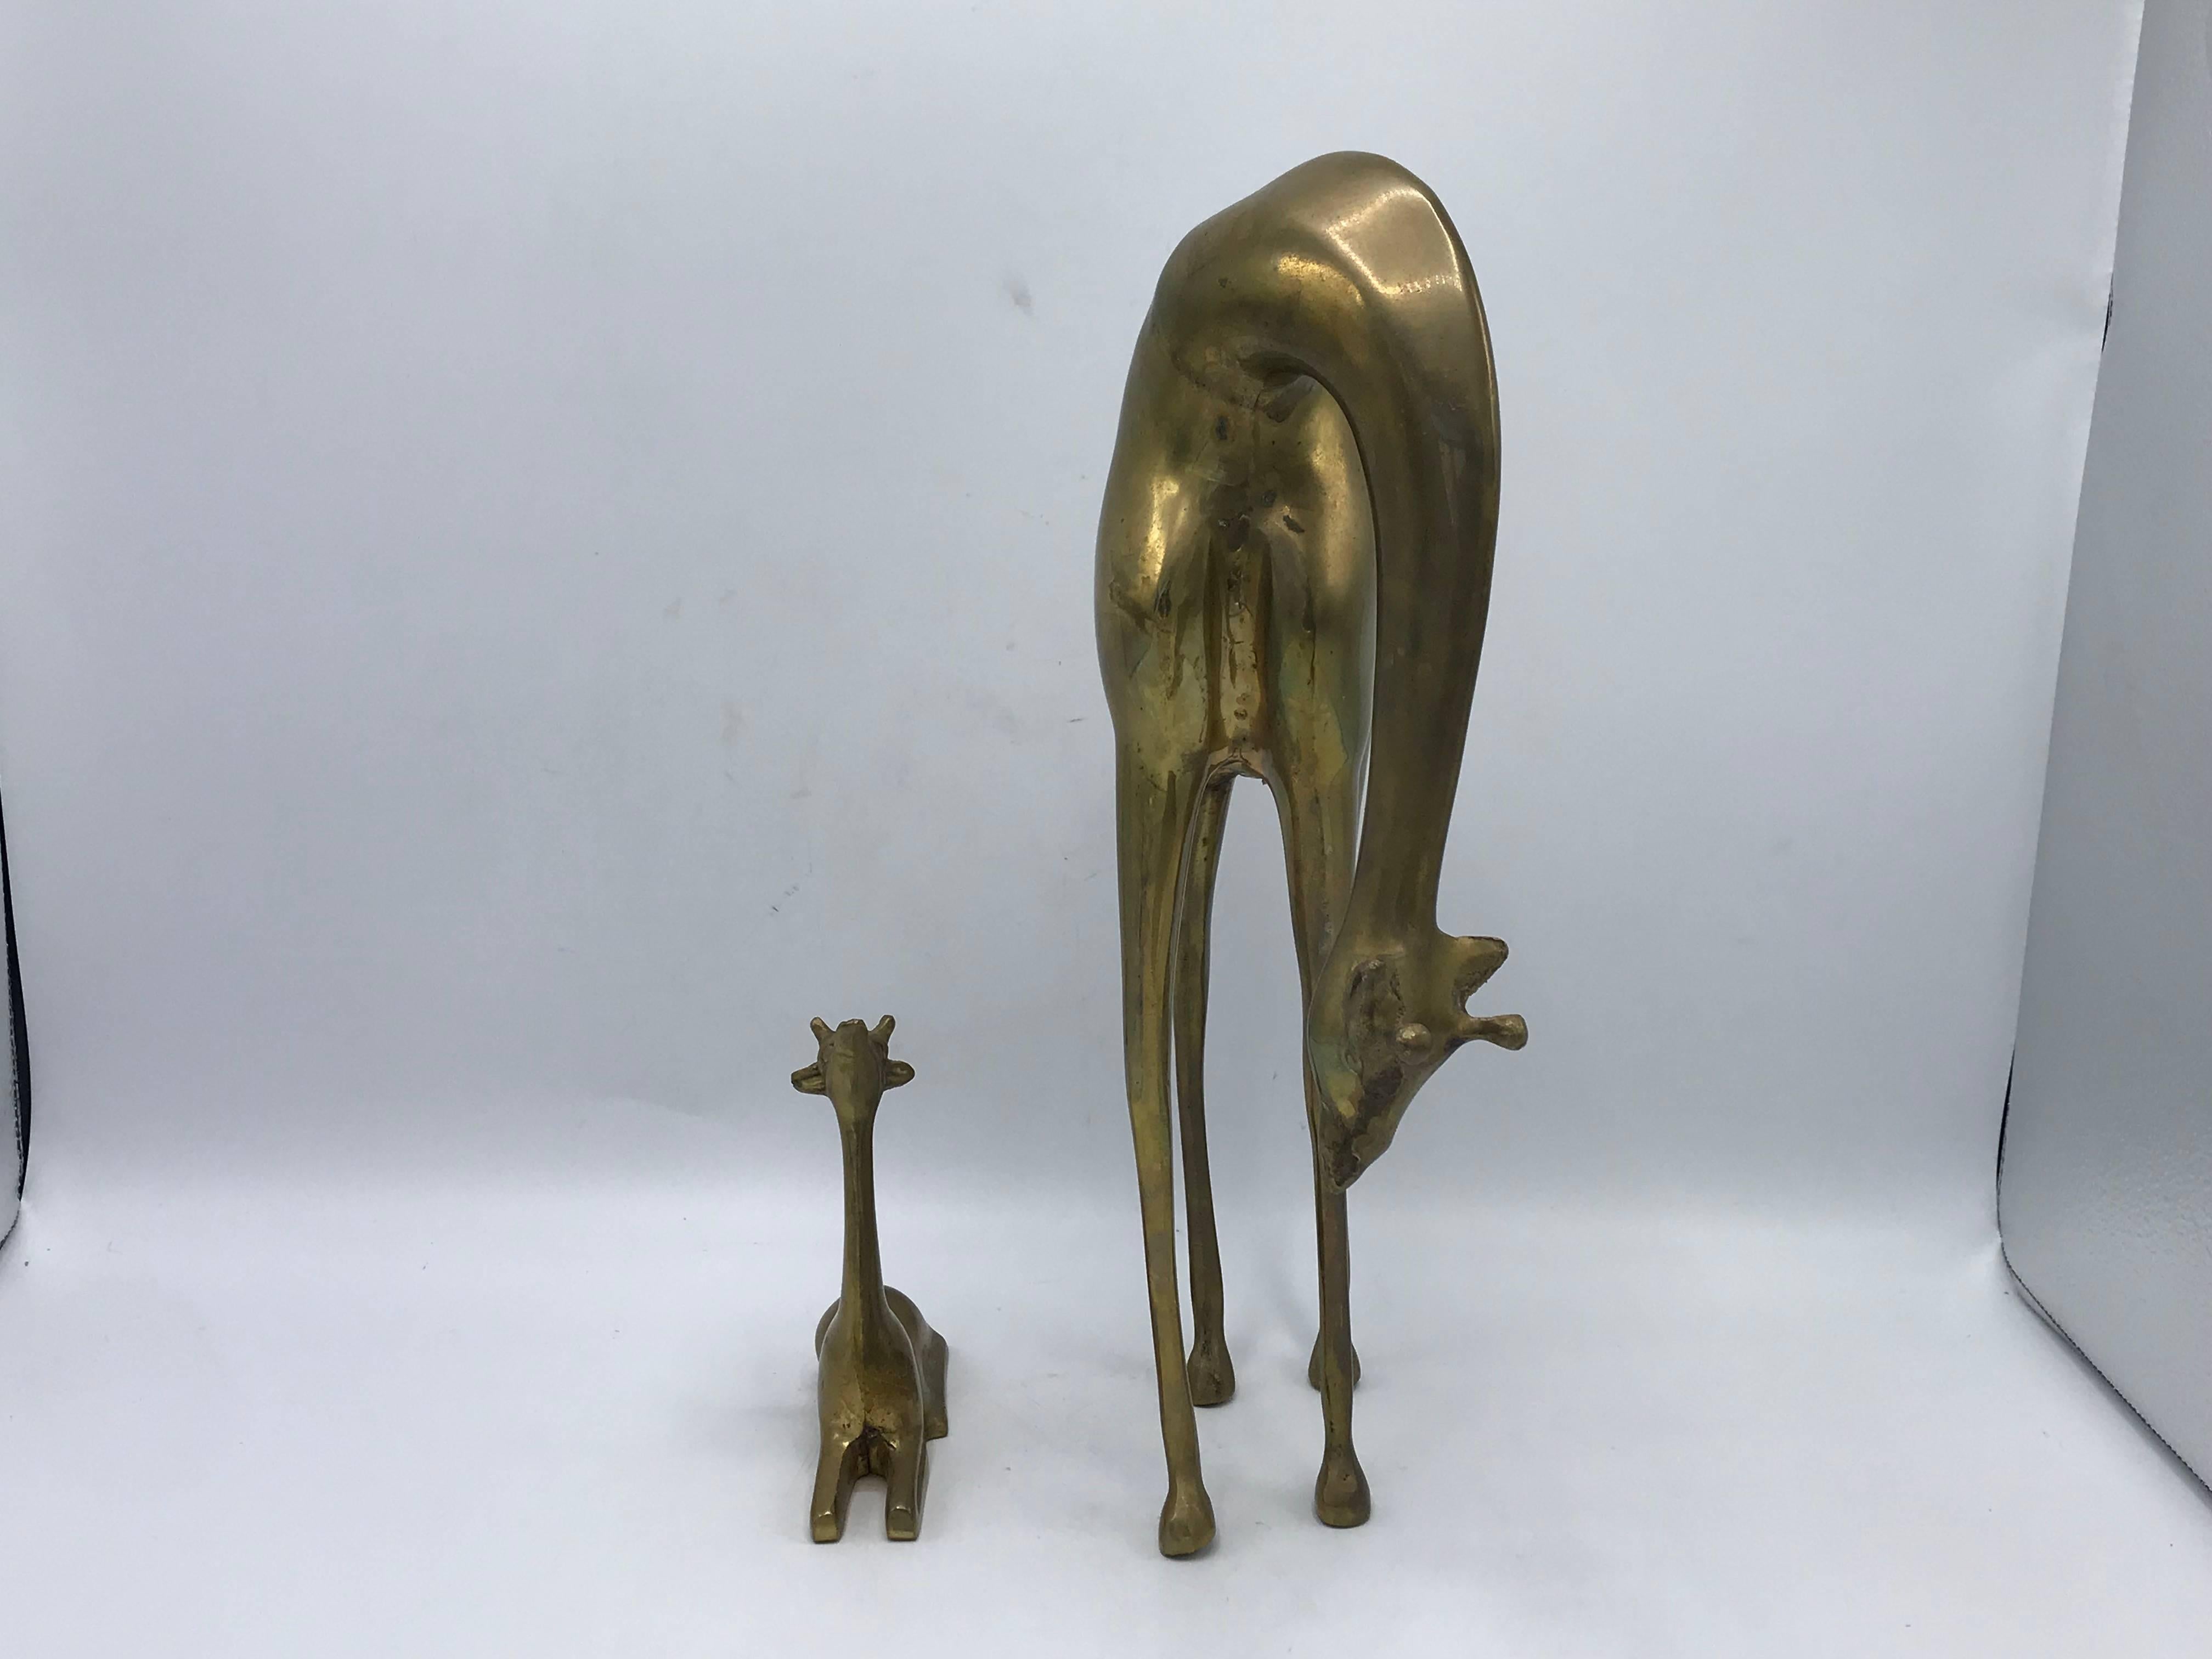 Listed is a gorgeous, pair of 1960s Italian brass giraffe sculptures. Heavy.

Measures: Large (standing): 14.75 H x 10 W x 4.75 D
Small (sitting): 5.5 H x 4.75 W x 1.75 D.